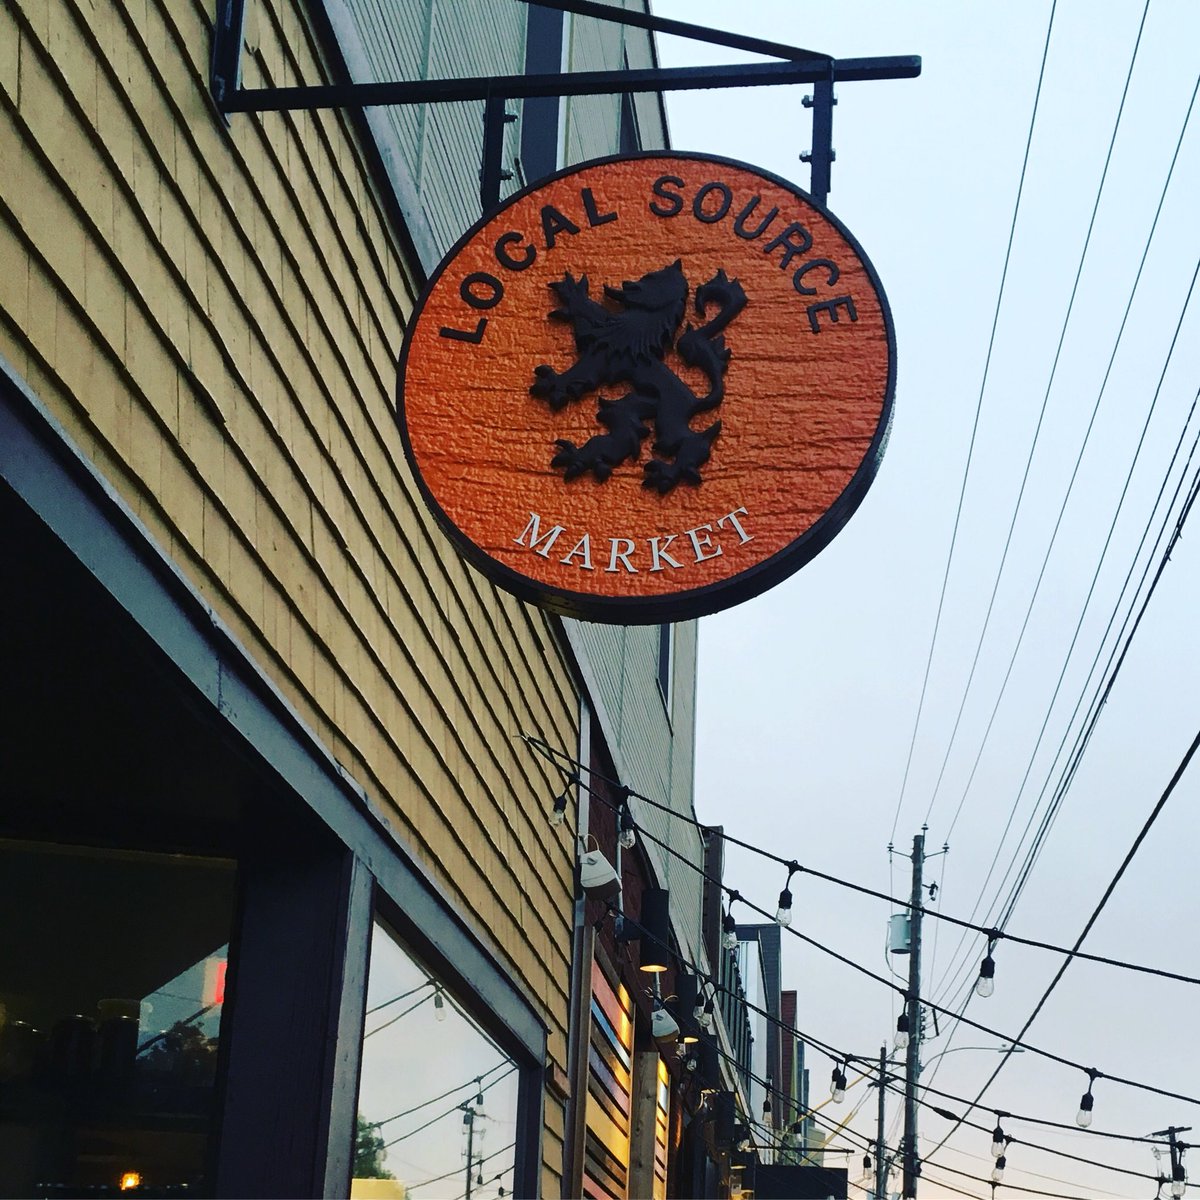 Came across @eatlocalsource last night on my evening walk. Found a new place to buy my Bison meat at! #HFXLocal #SupportLocal #Halifax #AgricolaStreet